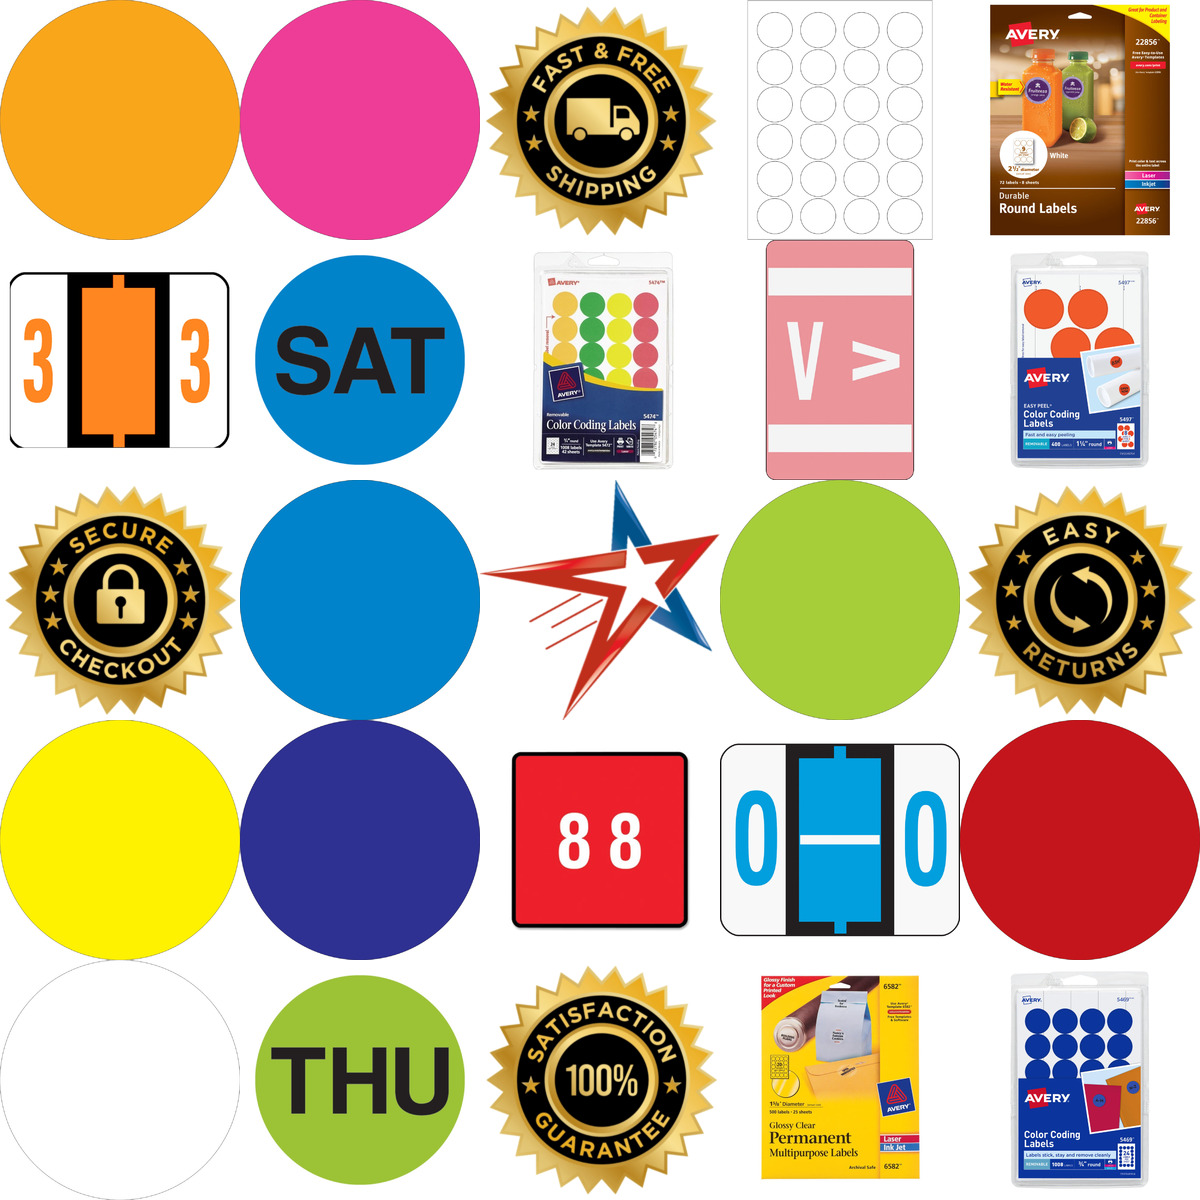 A selection of Color Coding and Round Labels products on GoVets